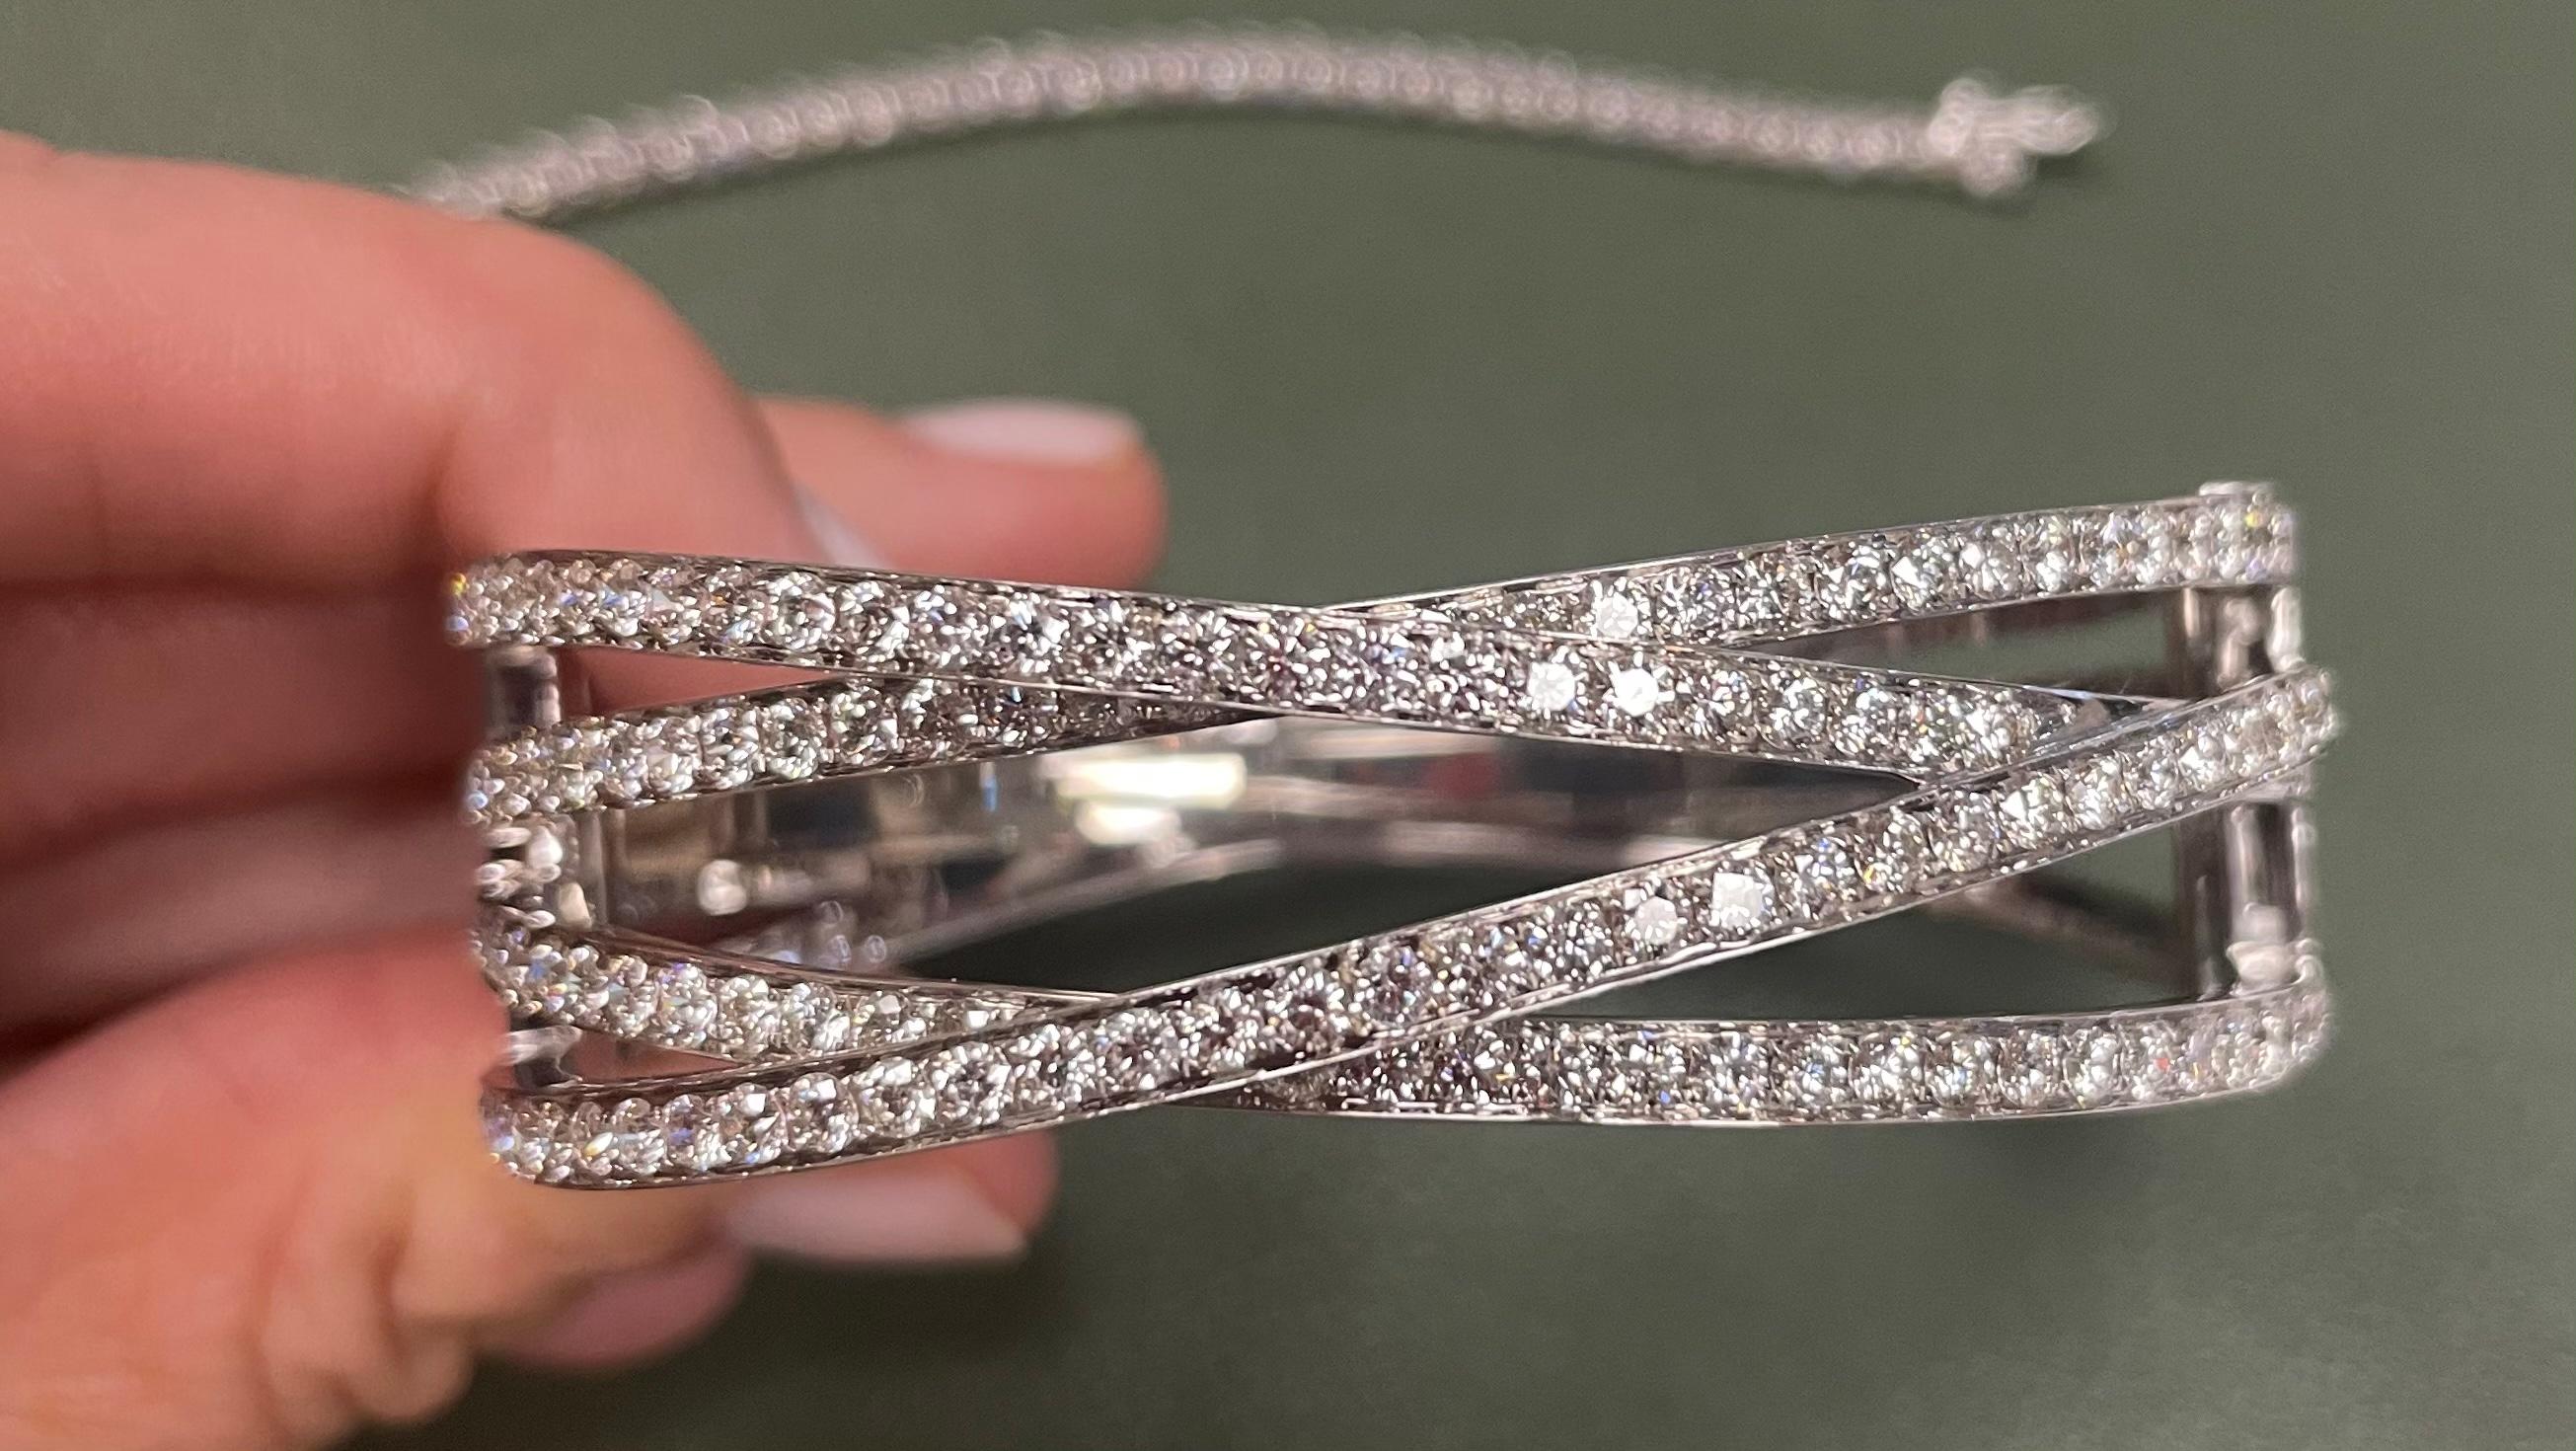 Exceptionally well made diamond bangle bracelet featuring 136 round brilliant diamond for a total carat weight of 5.91cts. The diamonds are estimated to be of G/H color and VS clarity set in 18kt white gold and stamped accordingly.